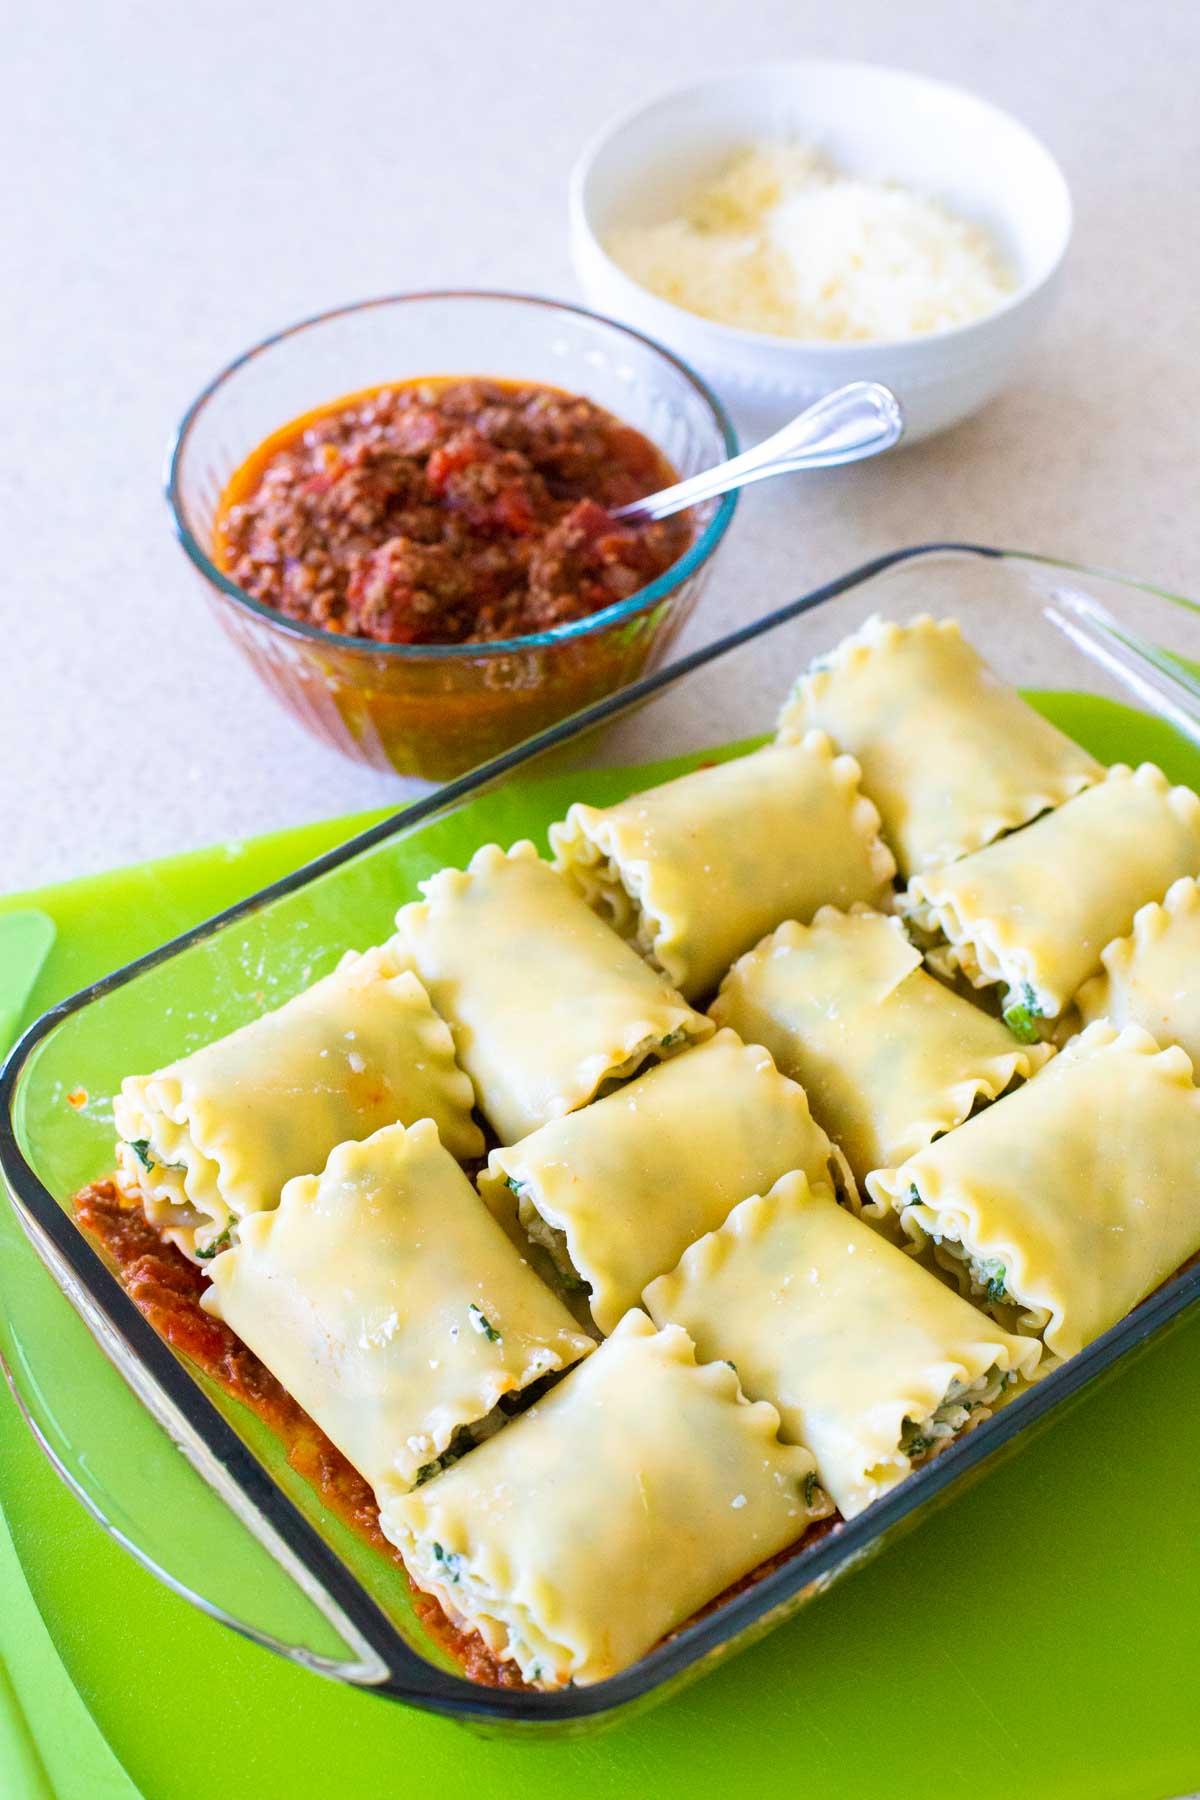 The baking dish has 12 lasagna roll-ups on a bed of tomato sauce.